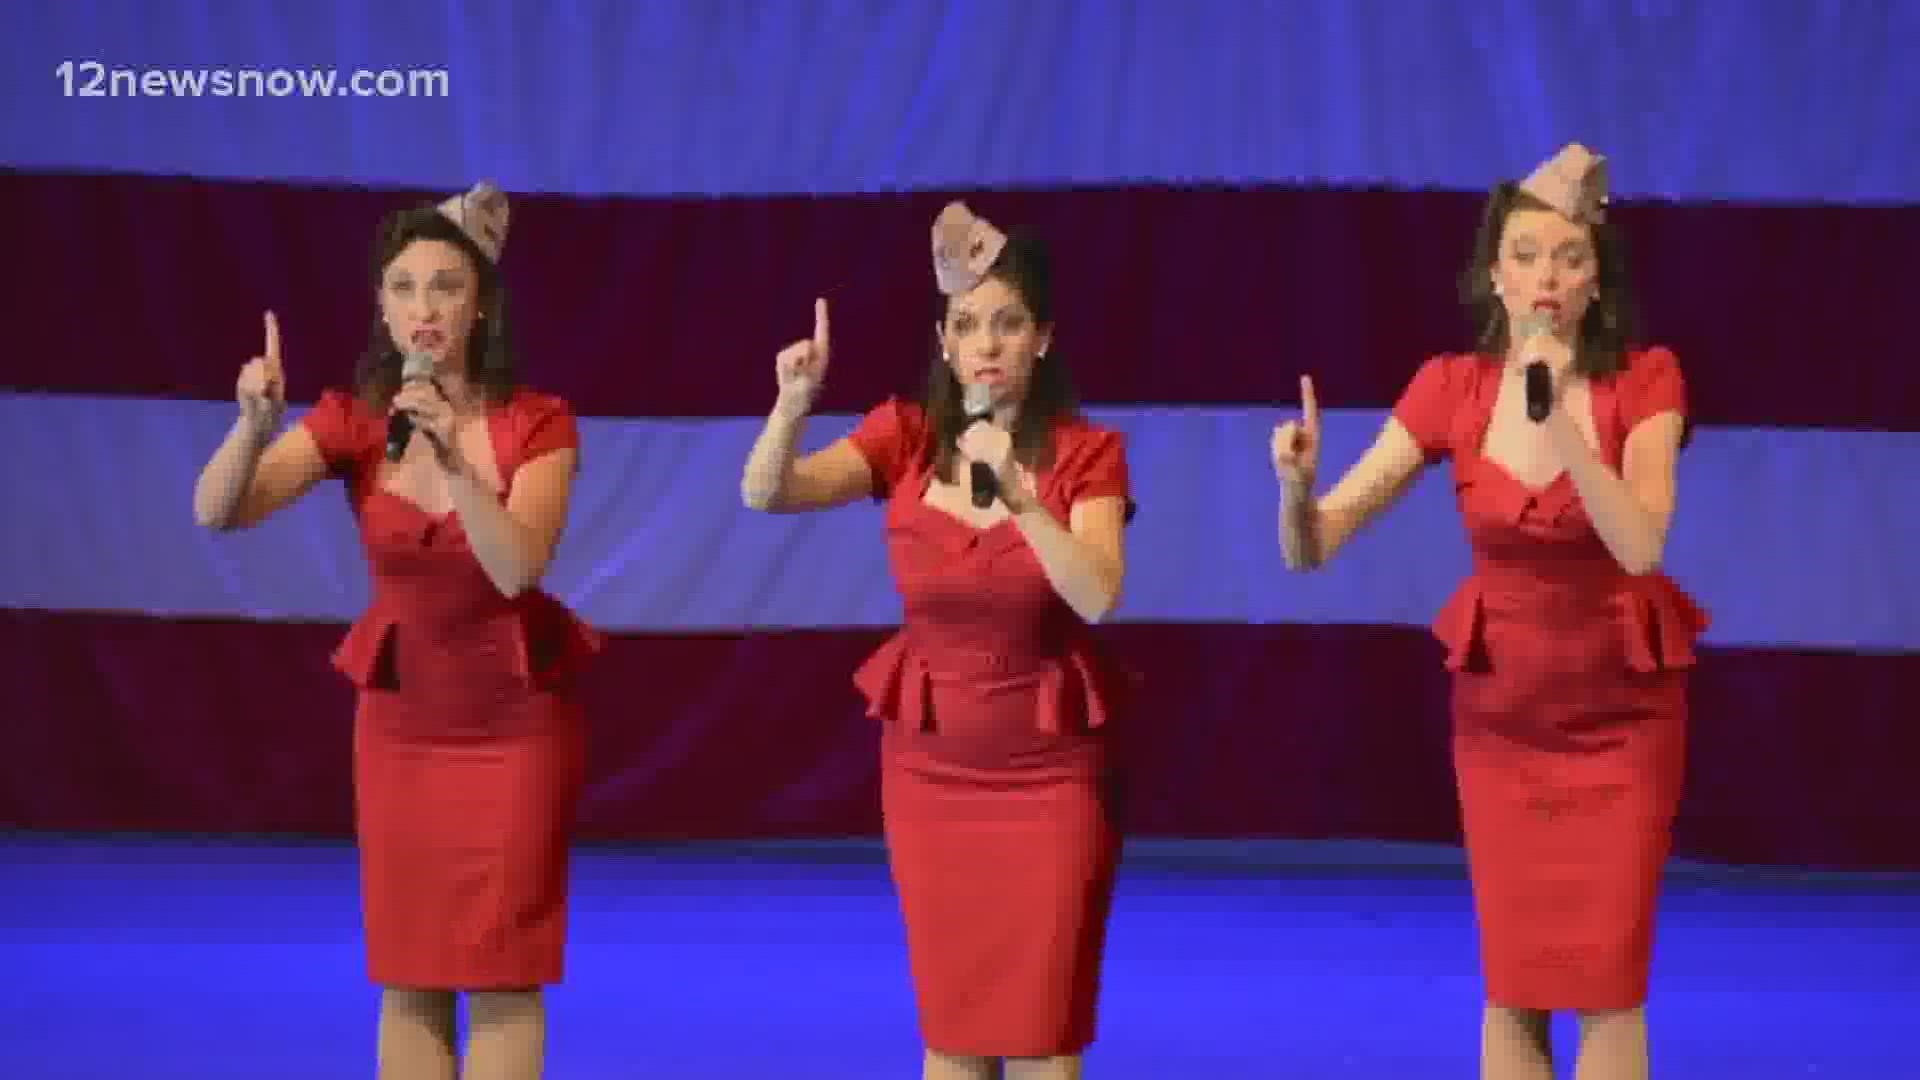 Southeast Texas' Amanda Lea Lavergne is in town with “America’s Sweethearts” for an evening of close female harmony in the style of The Andrews Sisters.